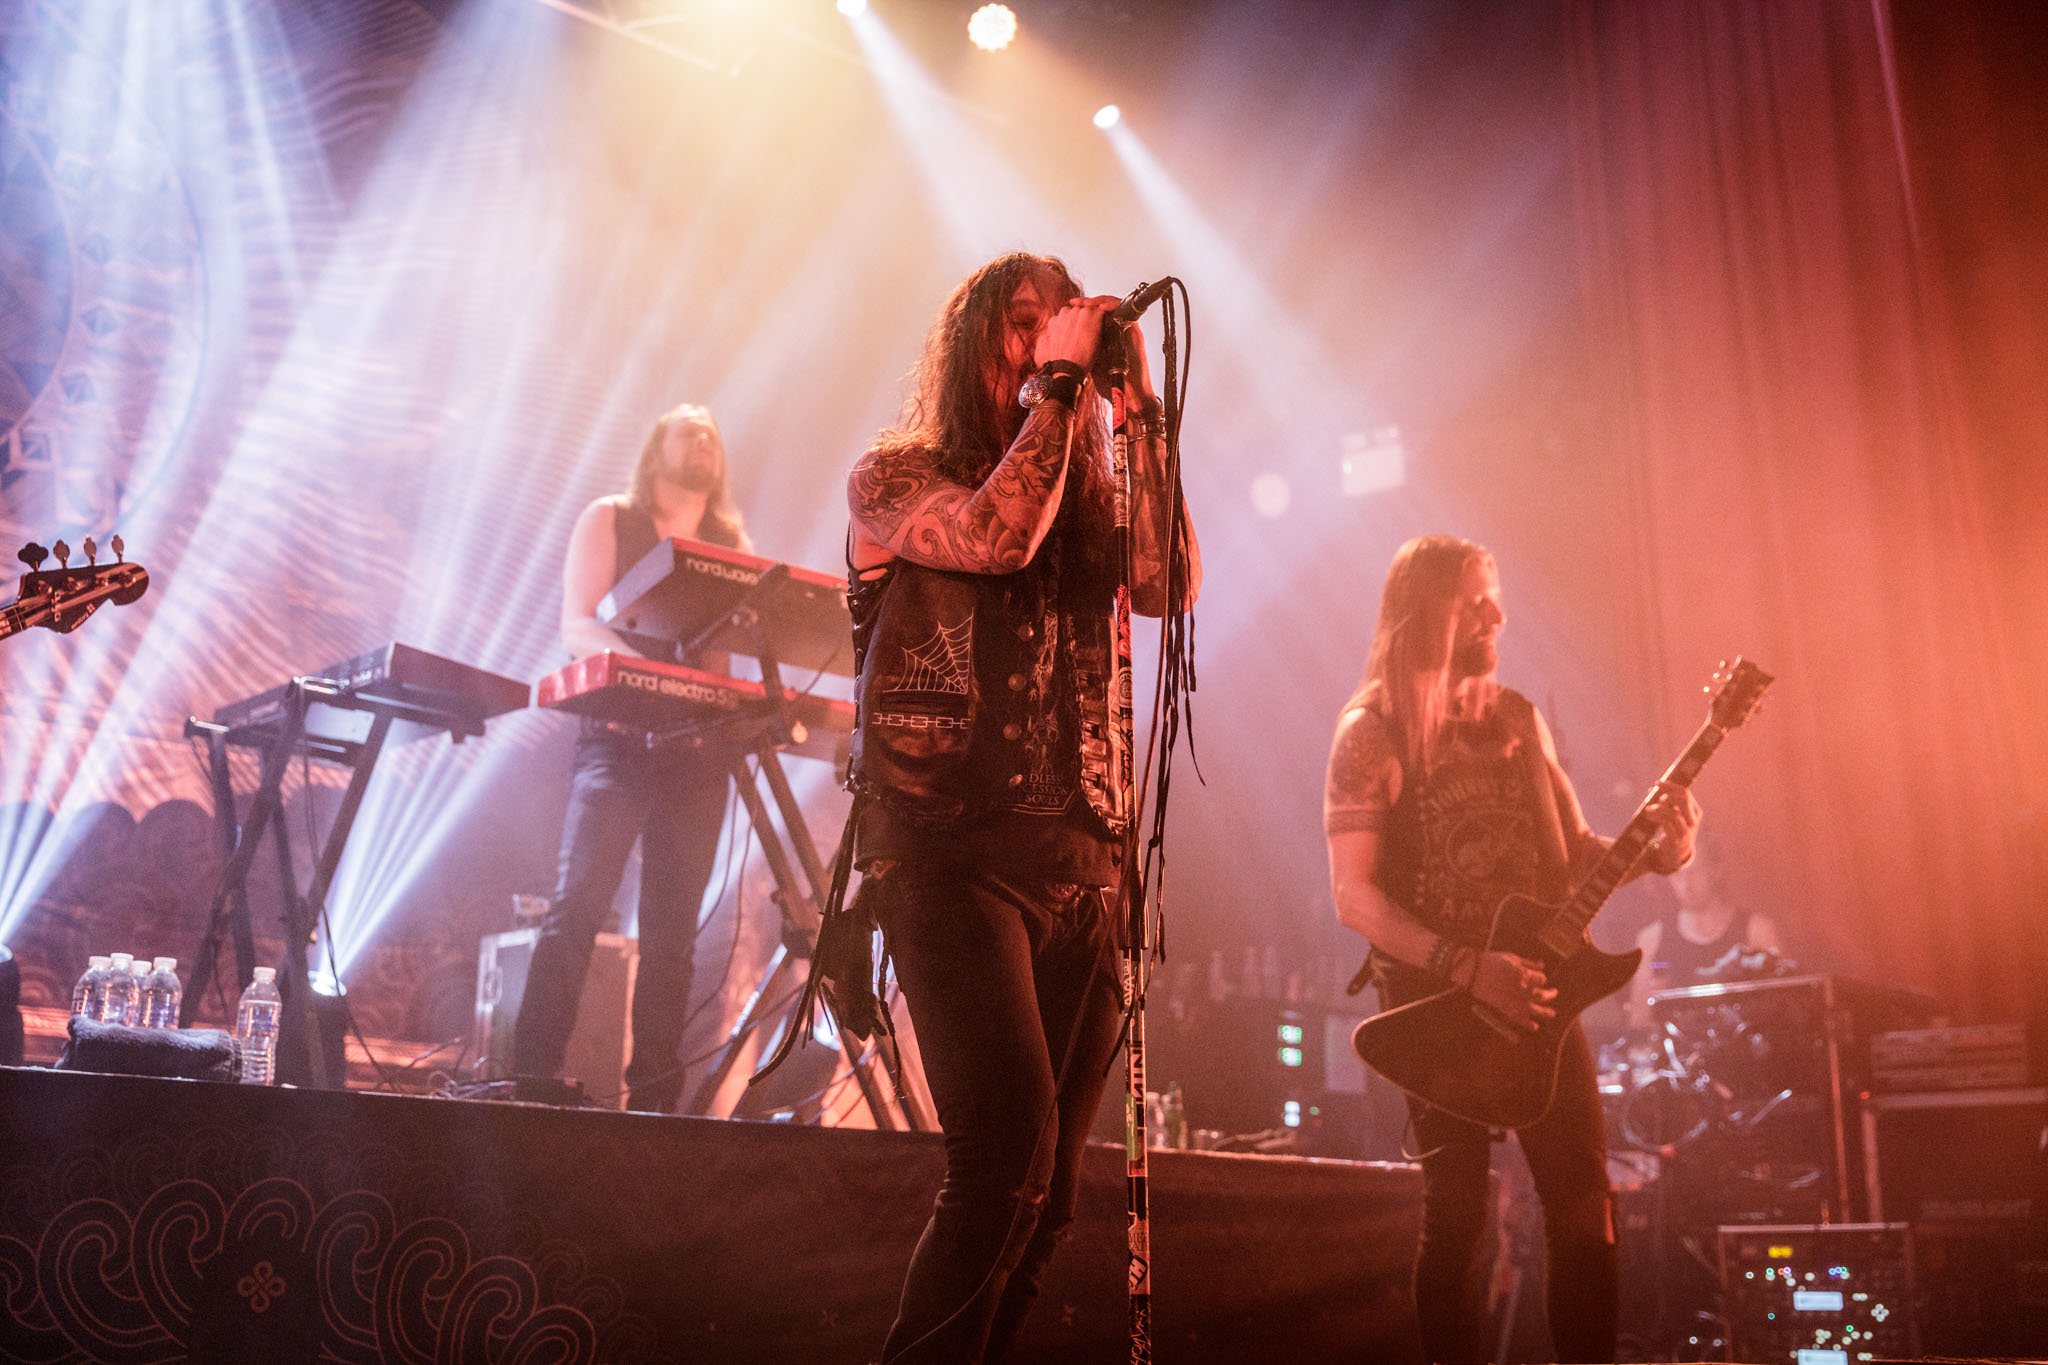 Amorphis at the O2 Ritz in Manchester on November 24th 2022 ©Jo